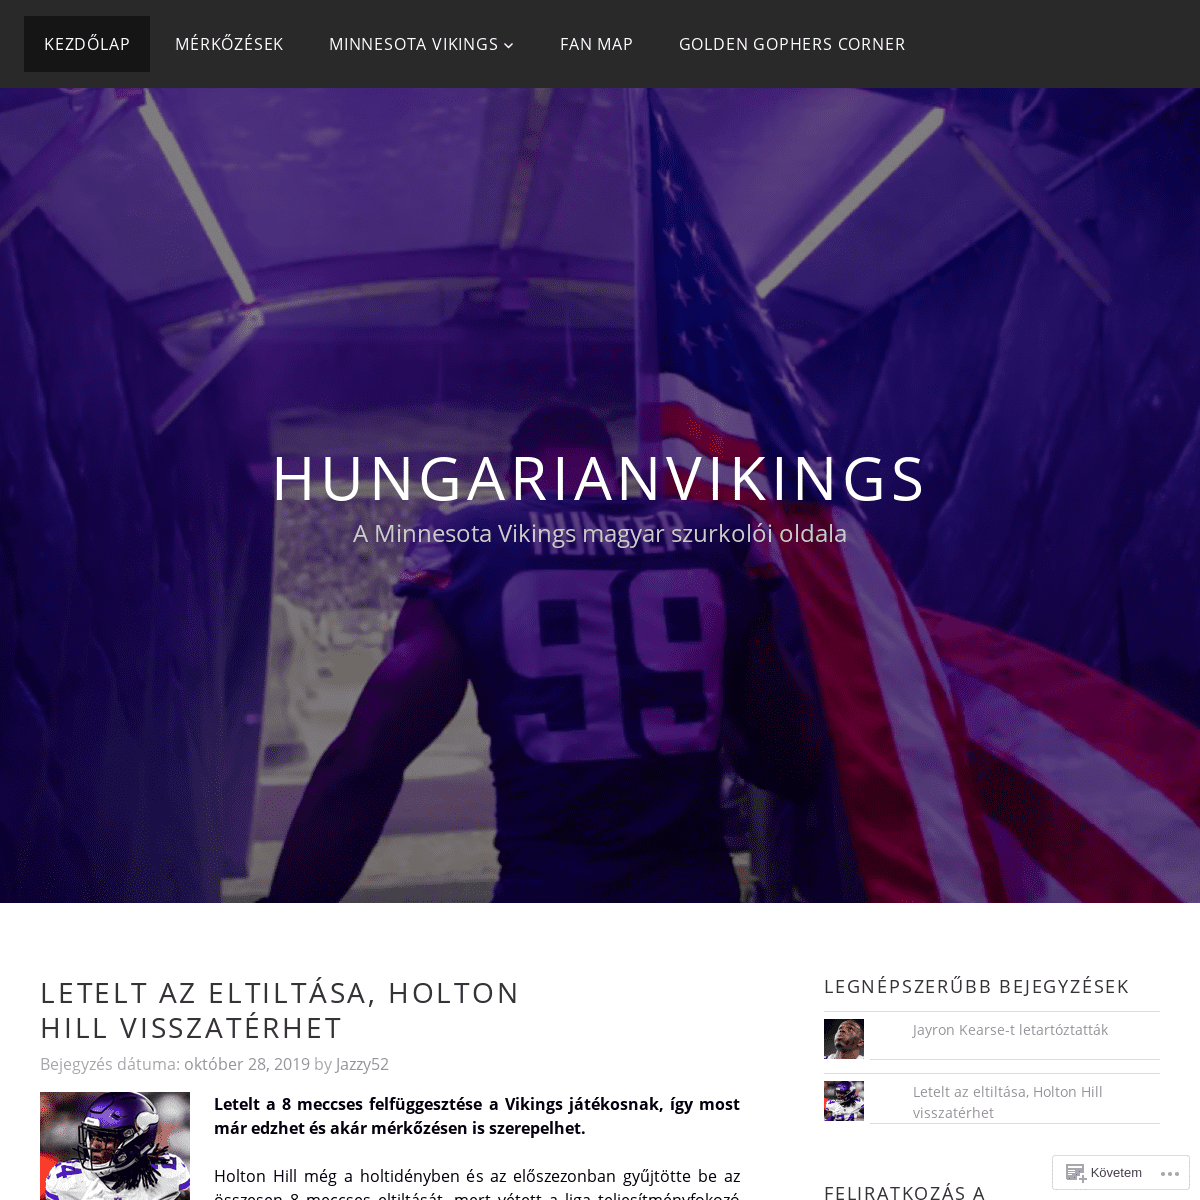 A complete backup of hungarianvikings.com